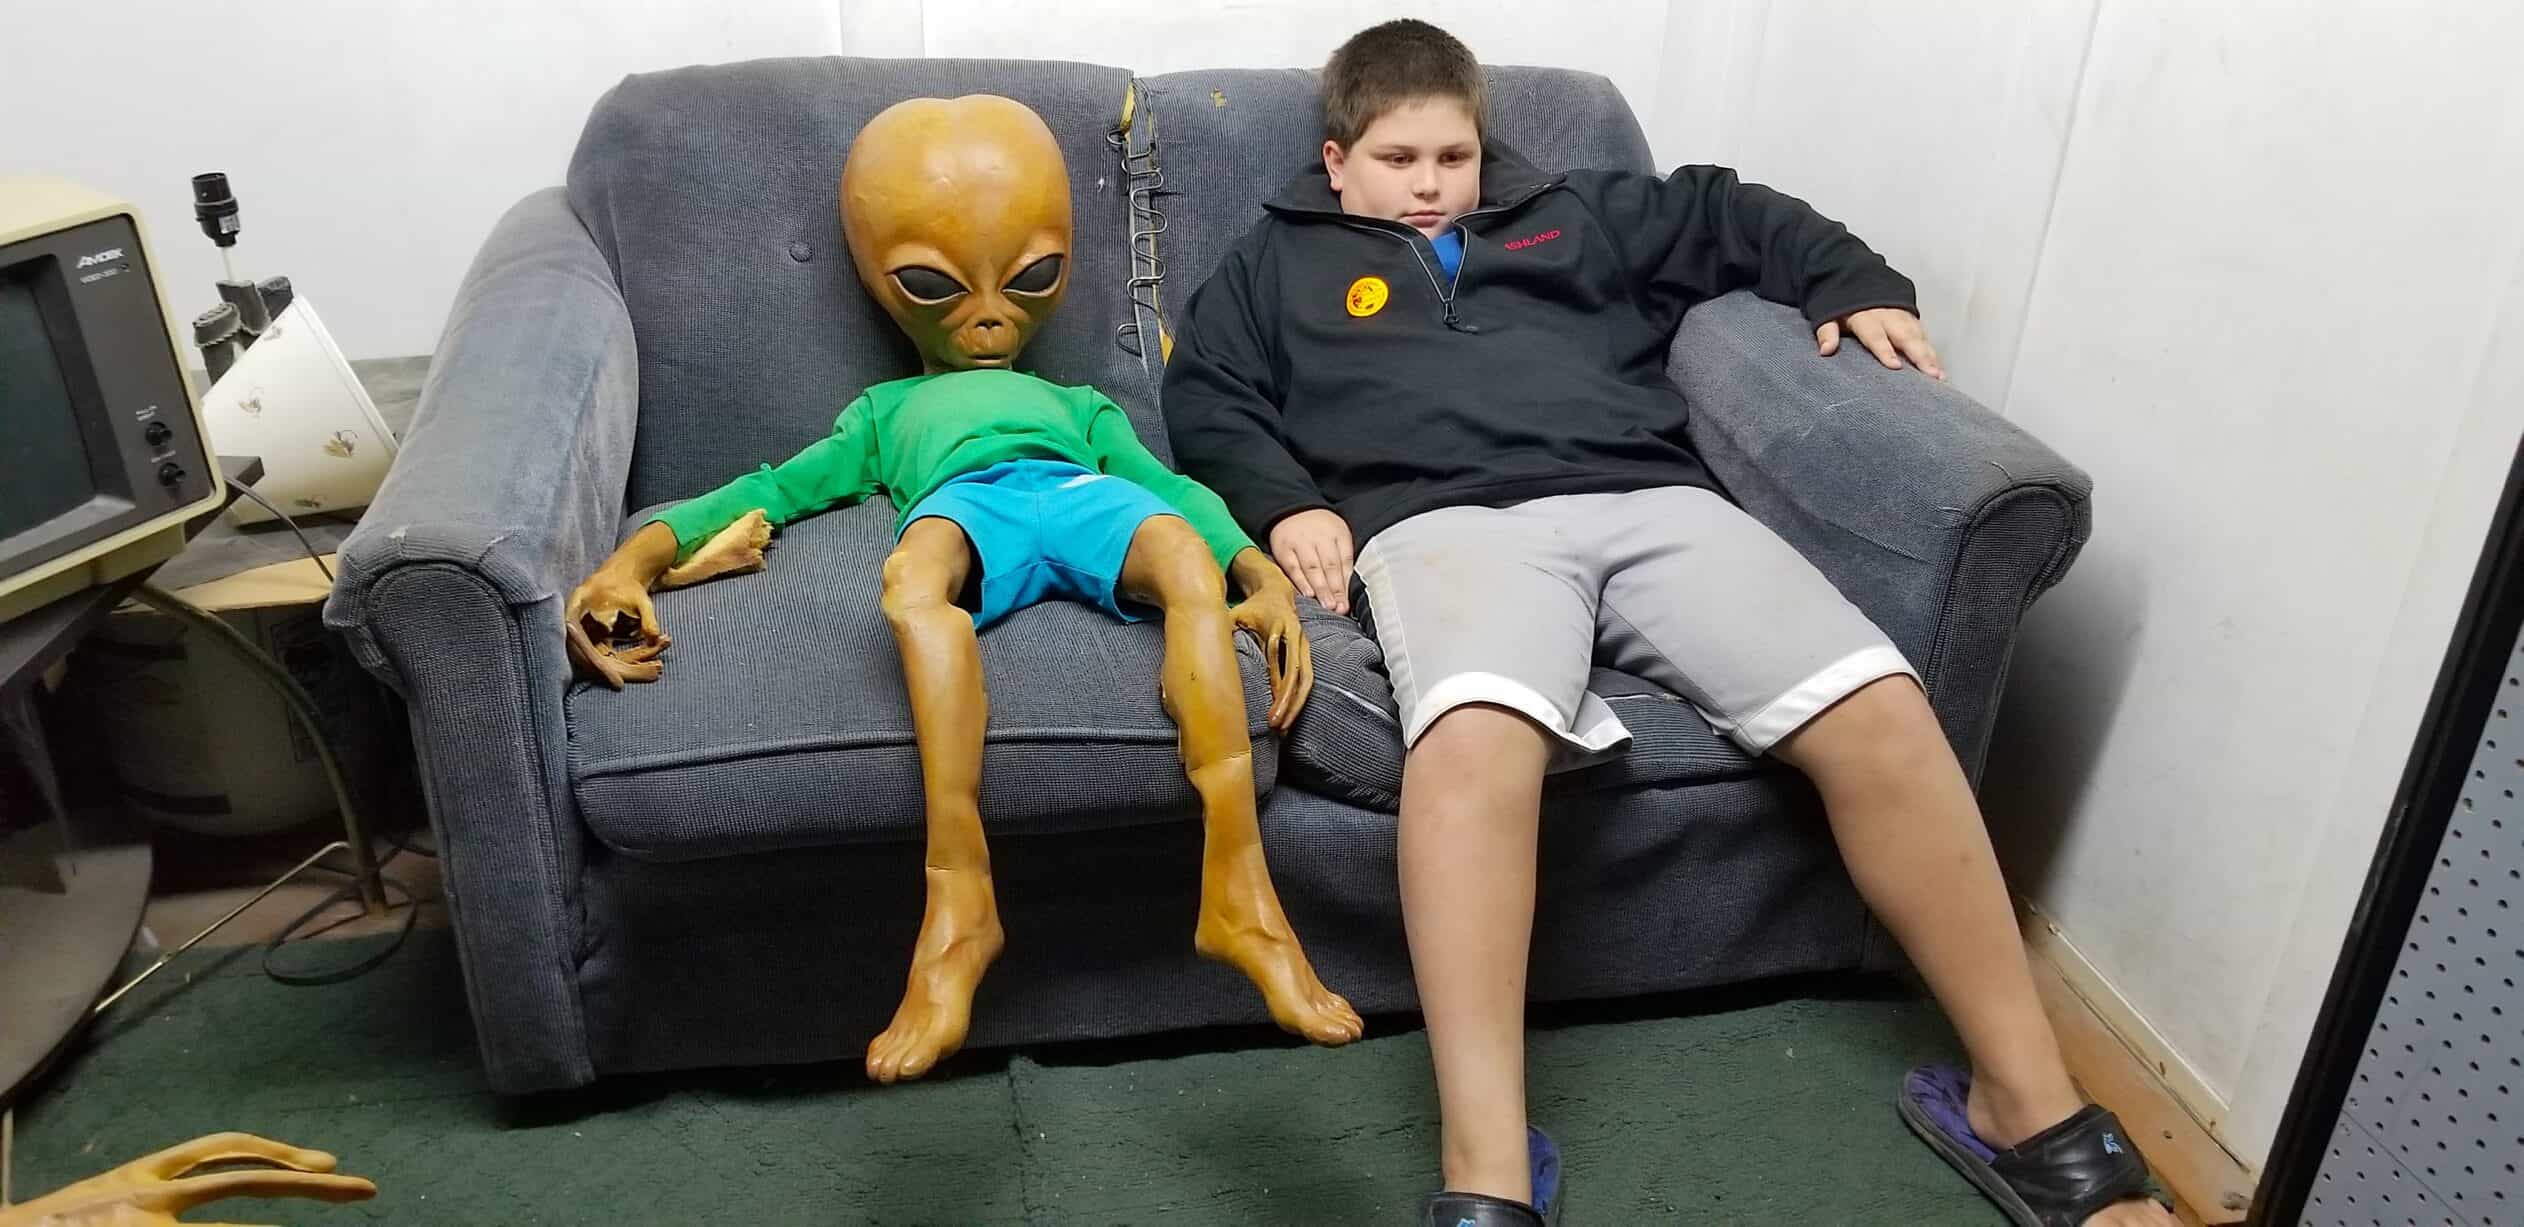 Alien Display in Roswell New Mexico